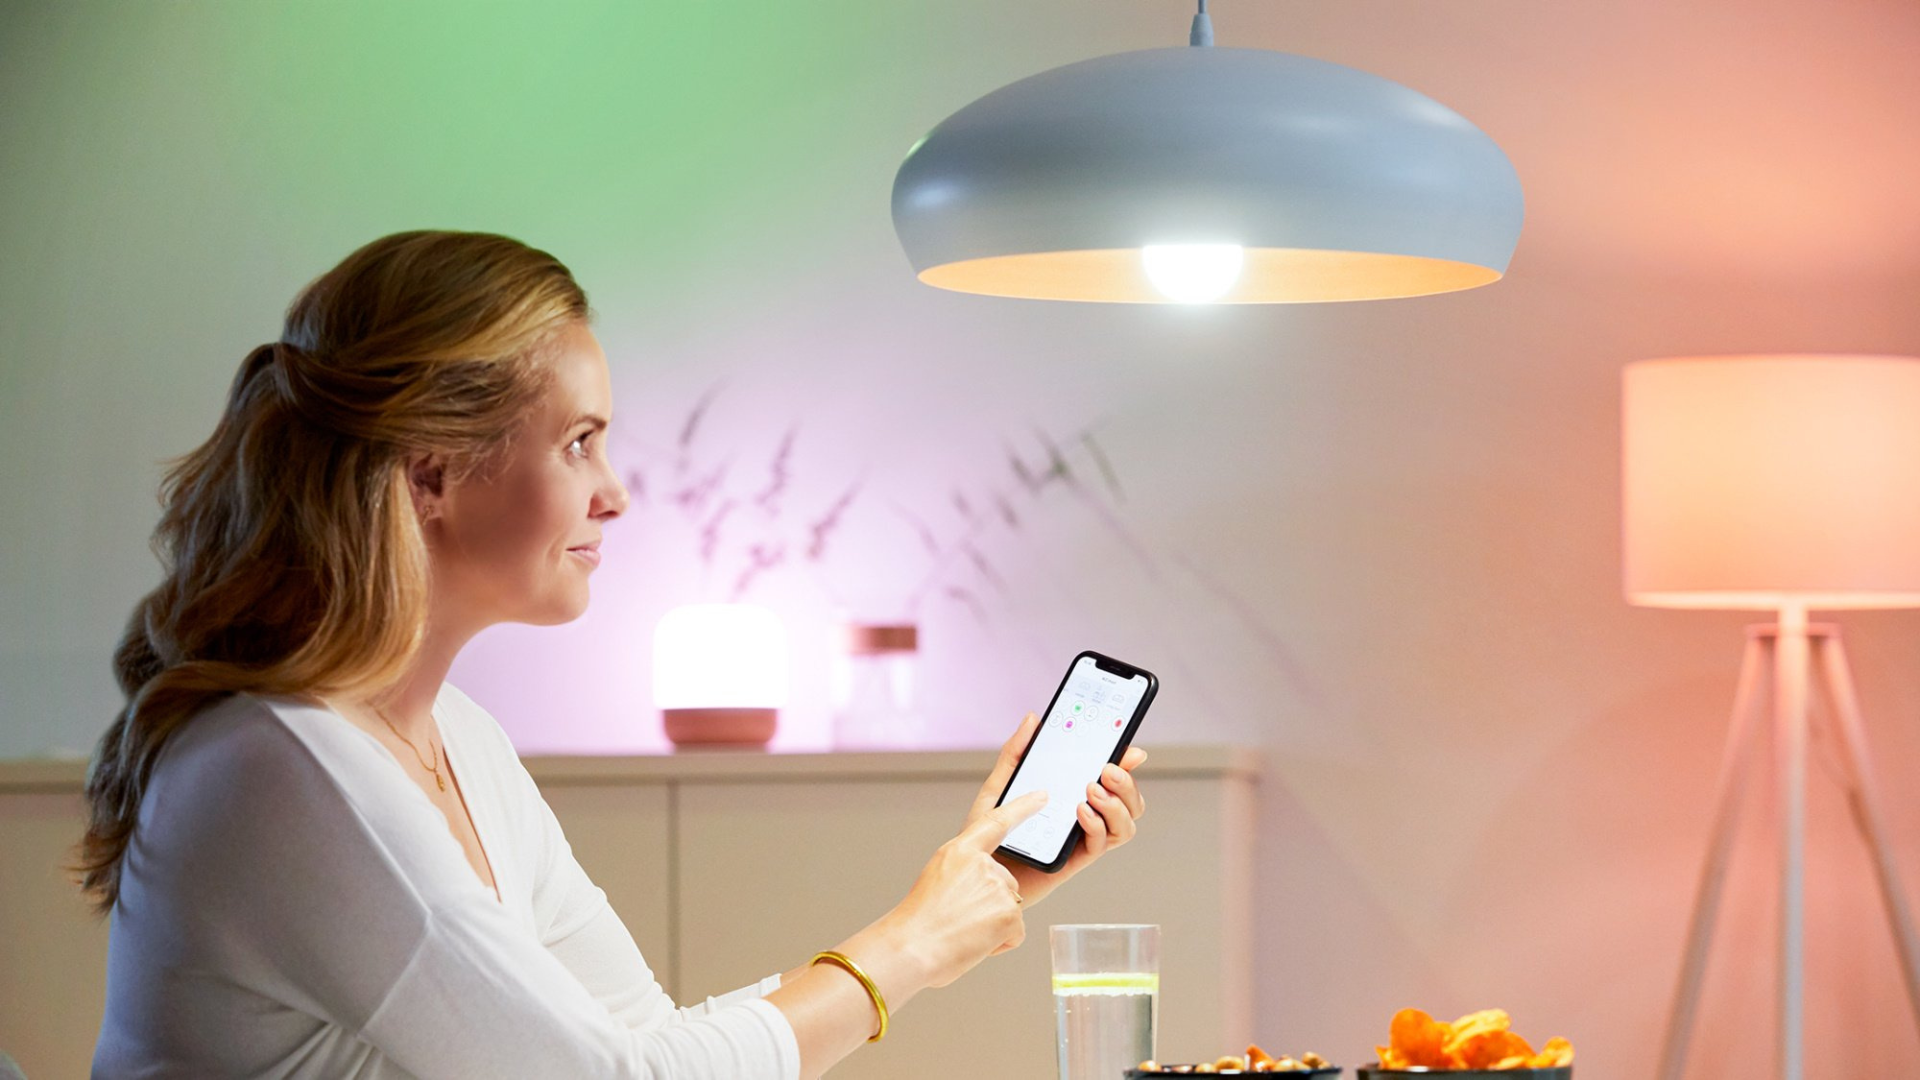 Philips Hue vs WiZ: which smart home lighting is right for you?